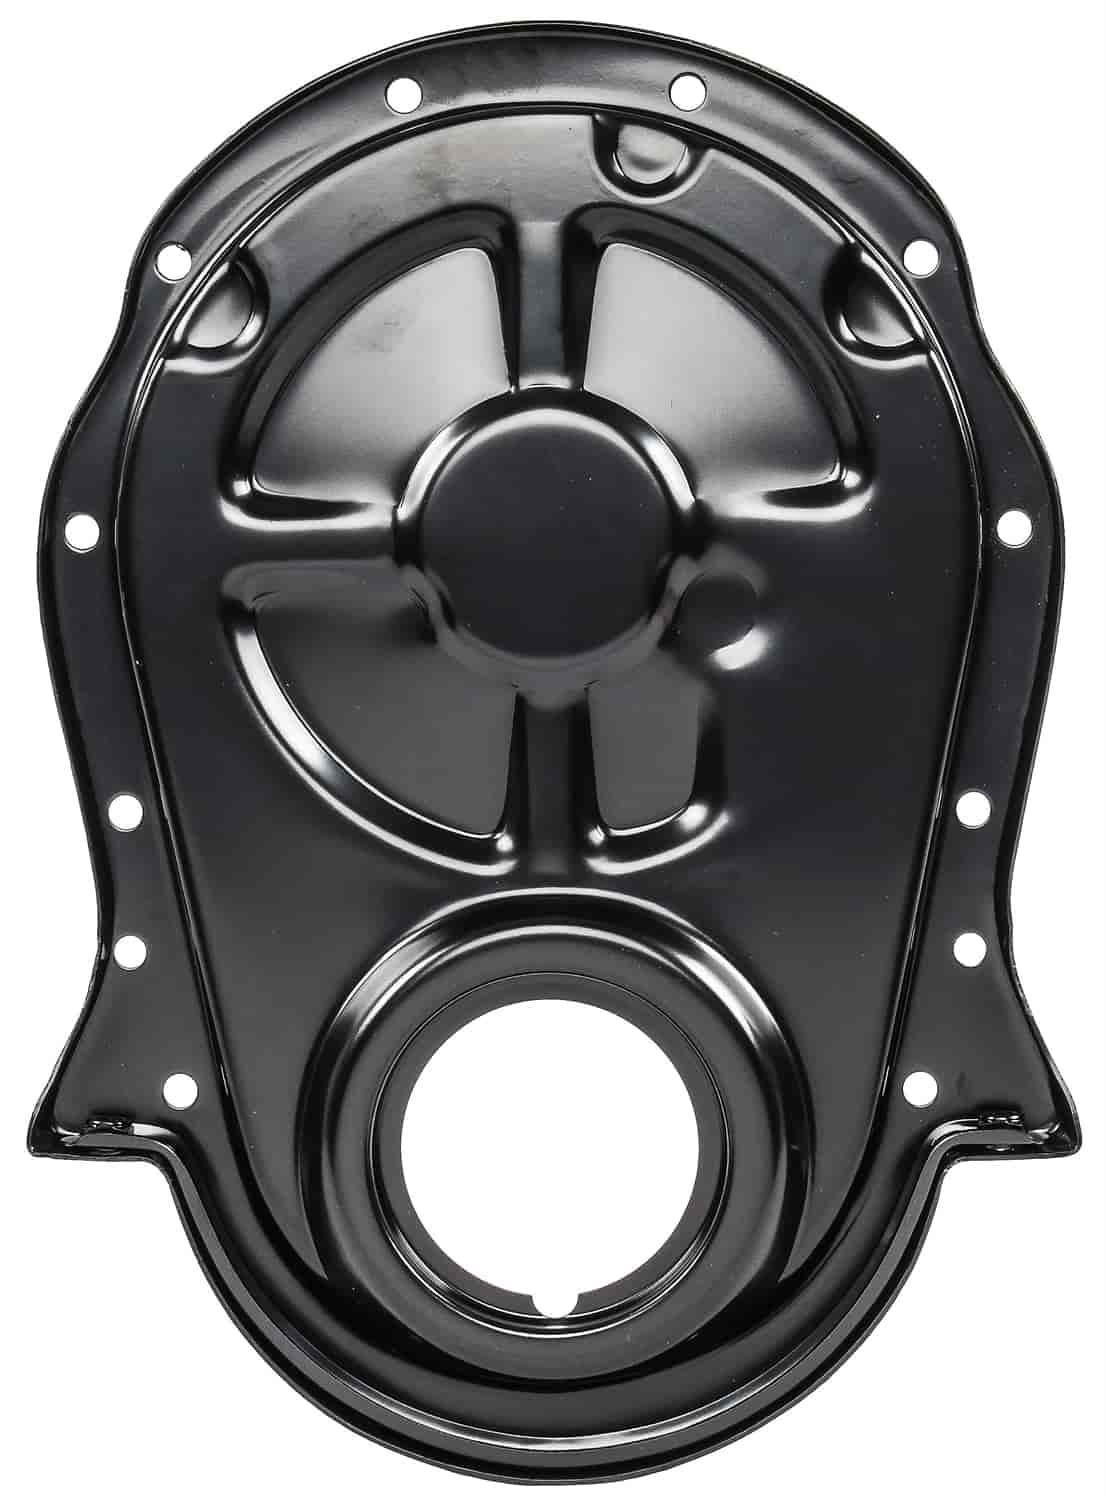 JEGS Timing Cover Fits 1965-1990 Big Block Chevy Engines Polished Cast Aluminum Includes Timing Cover, Timing Cover Gasket, Water Pump Gaskets, - 1